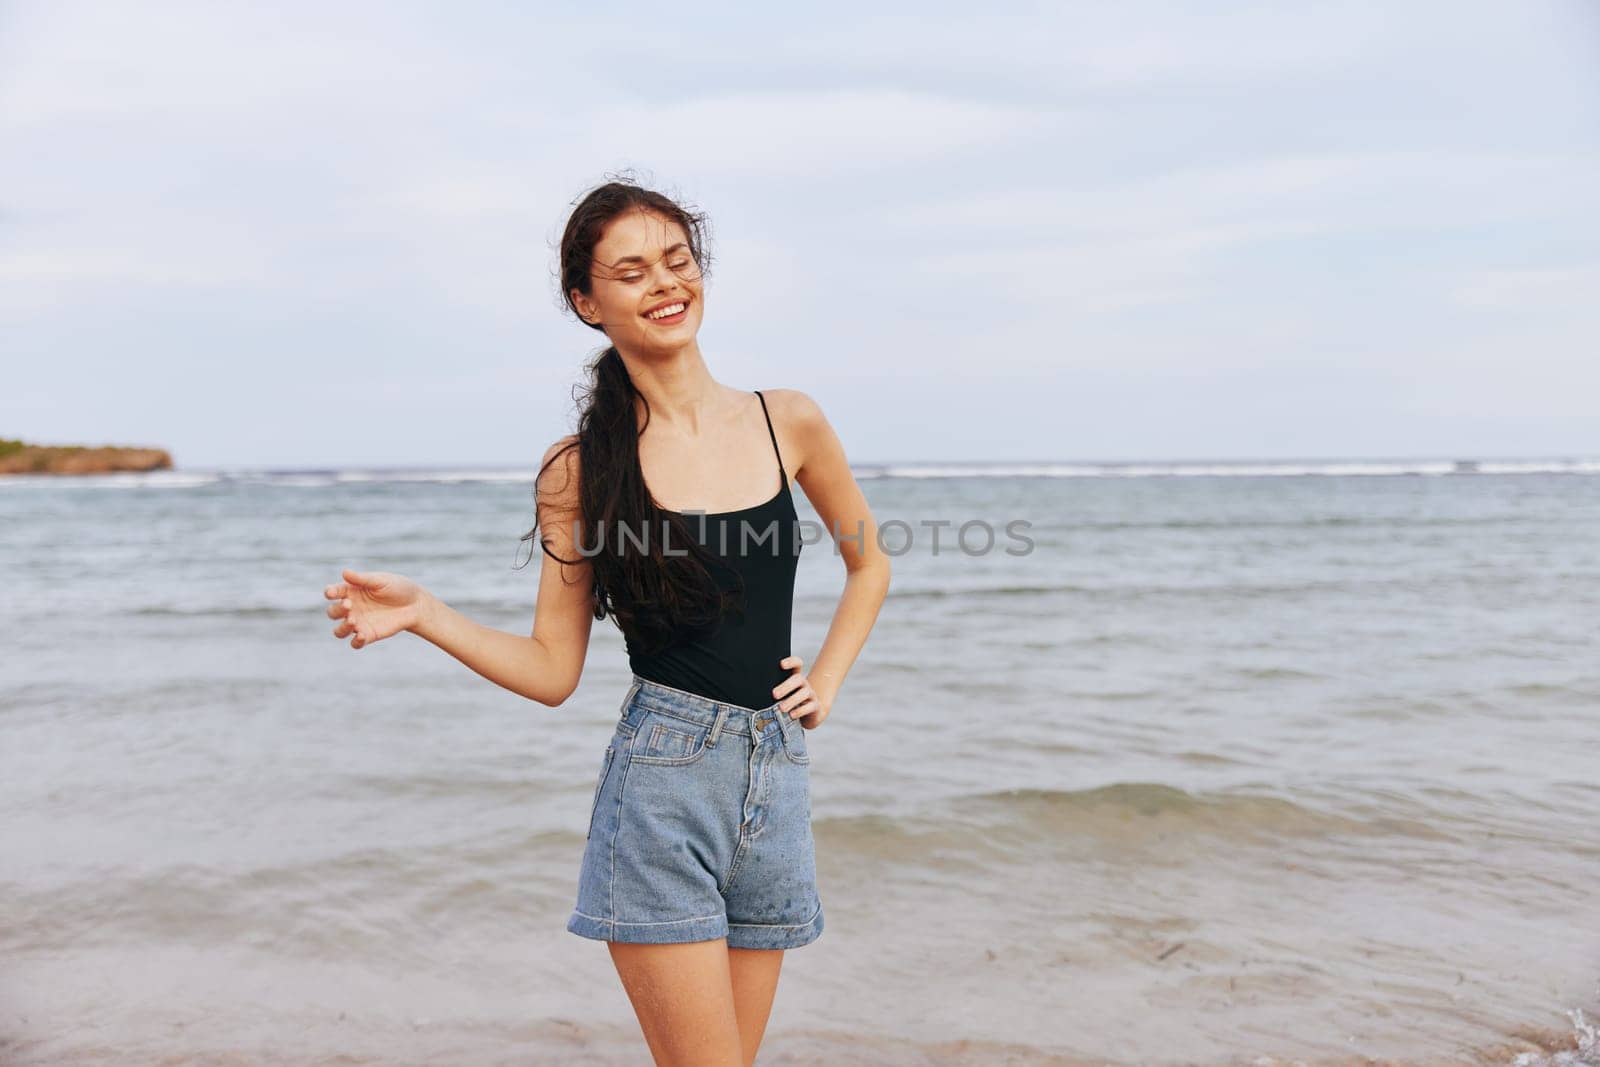 tropical woman smiling sunlight vacation holiday copy space beach sunset jean sand lifestyle summer carefree sea ocean female enjoyment adult shore smile